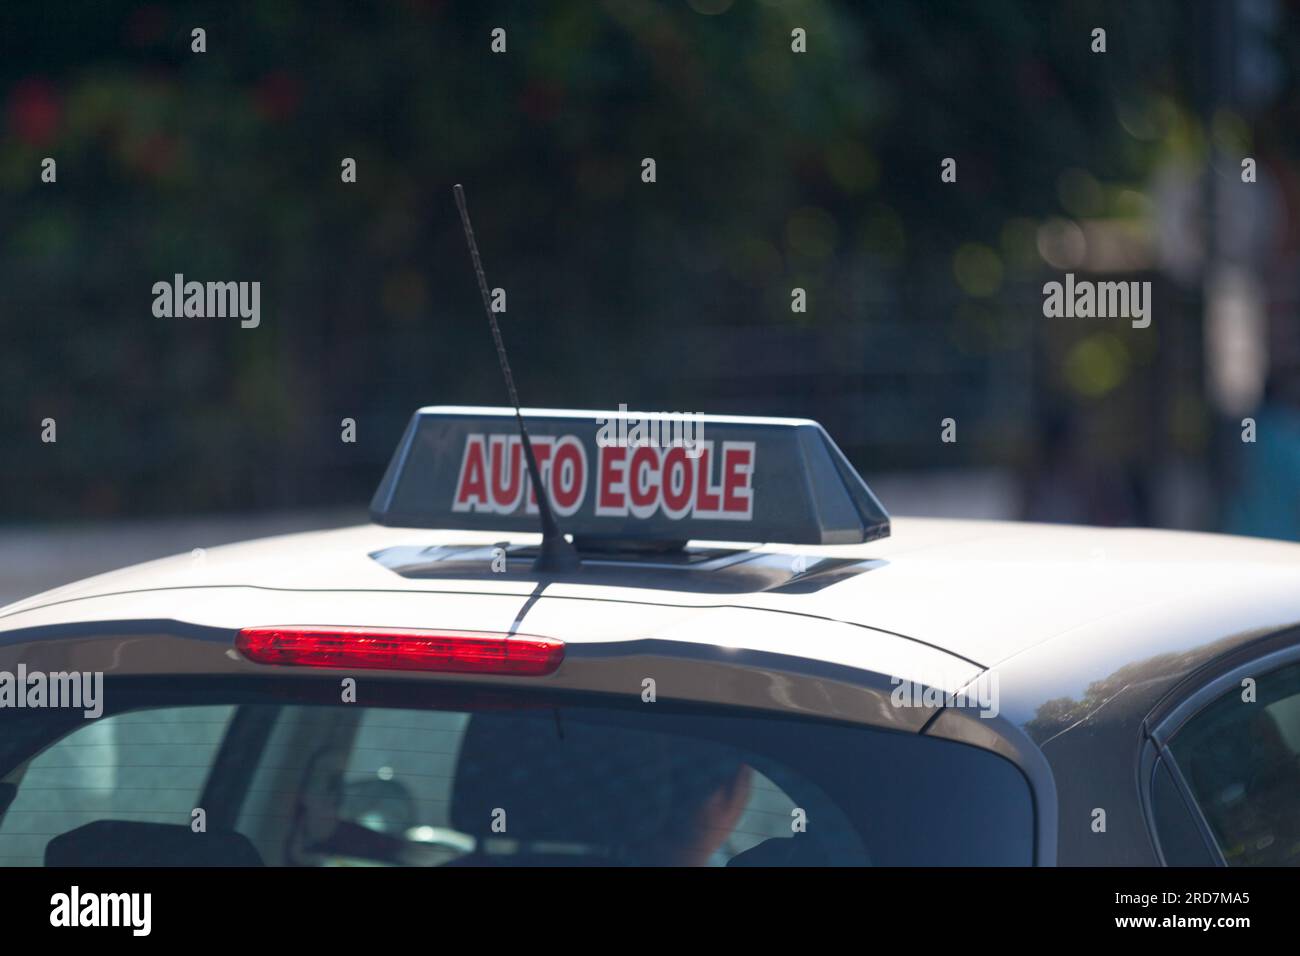 Car roof sign with written in it in French 'Auto-École', meaning in English 'Driving school'. Stock Photo